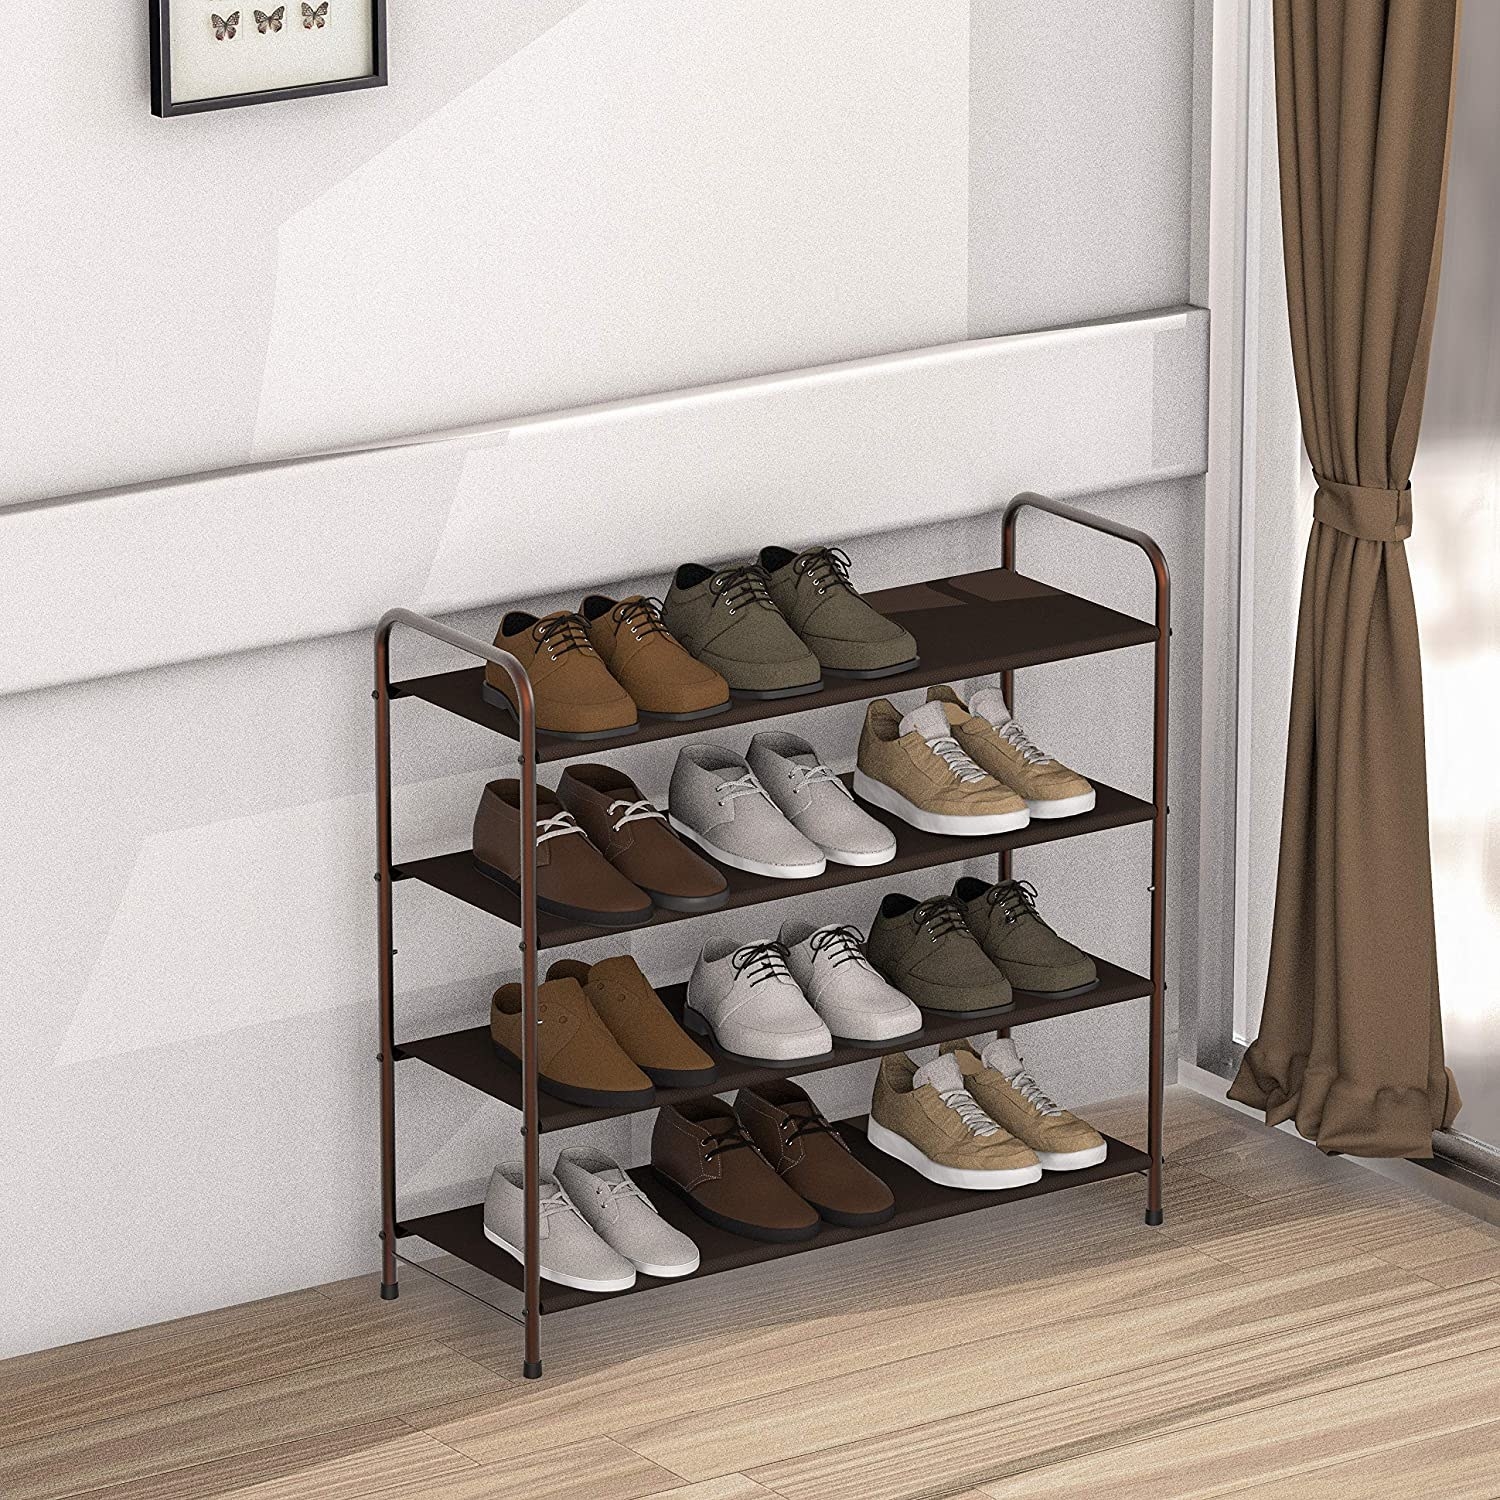 the shoe rack filled with shoes